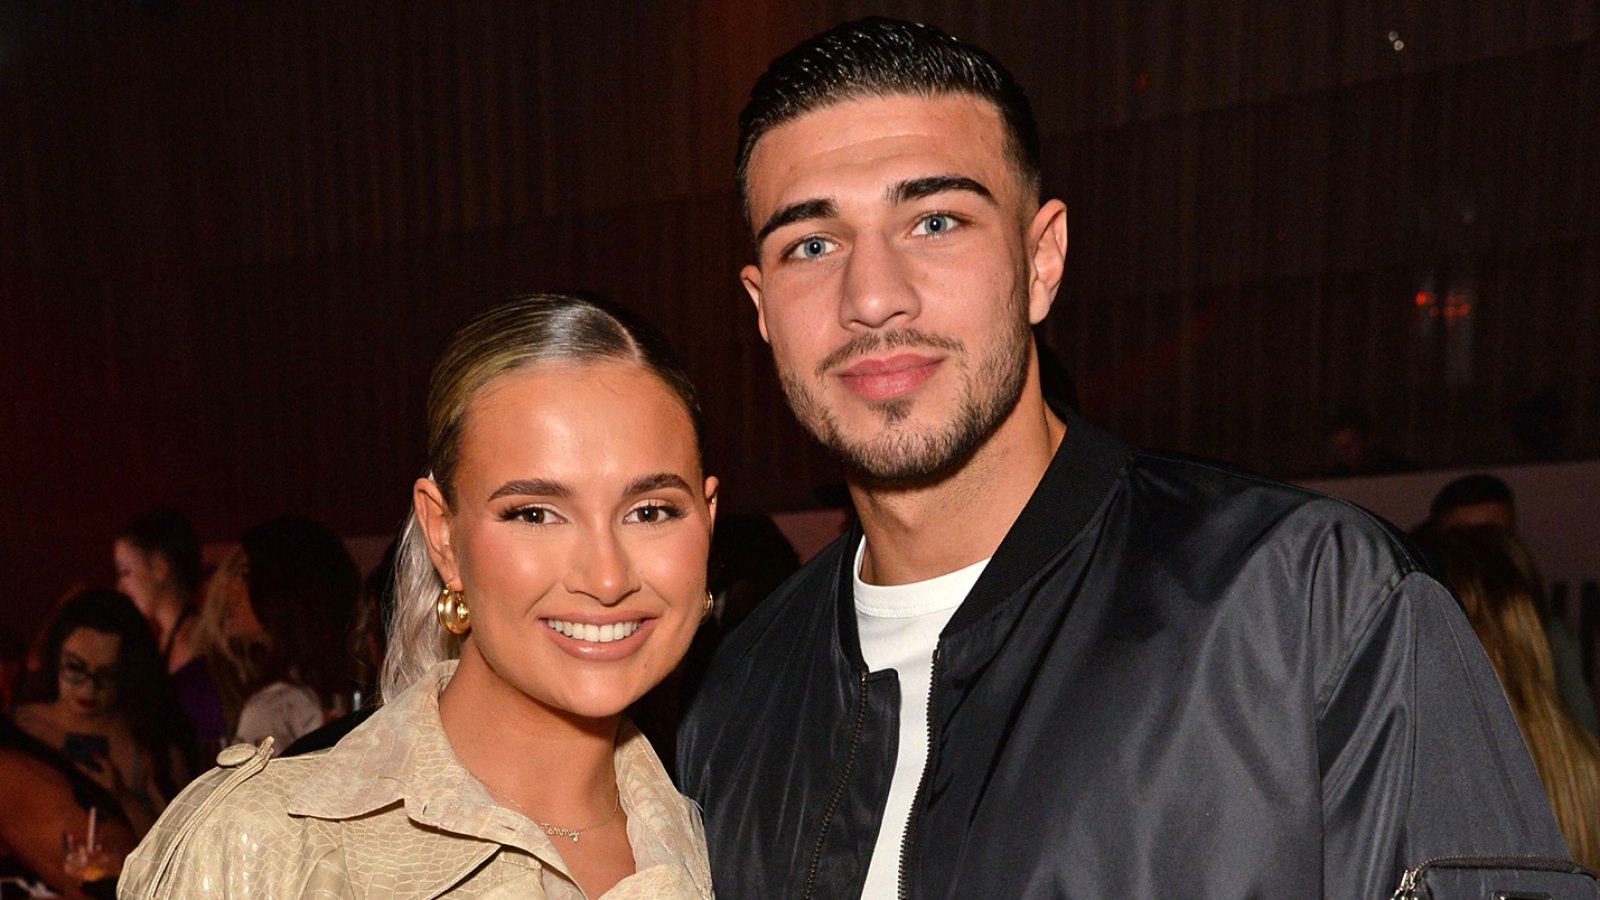 Love Island UK’s Molly-Mae Hague and Tommy Fury Are Engaged After Pregnancy News: Proposal Details